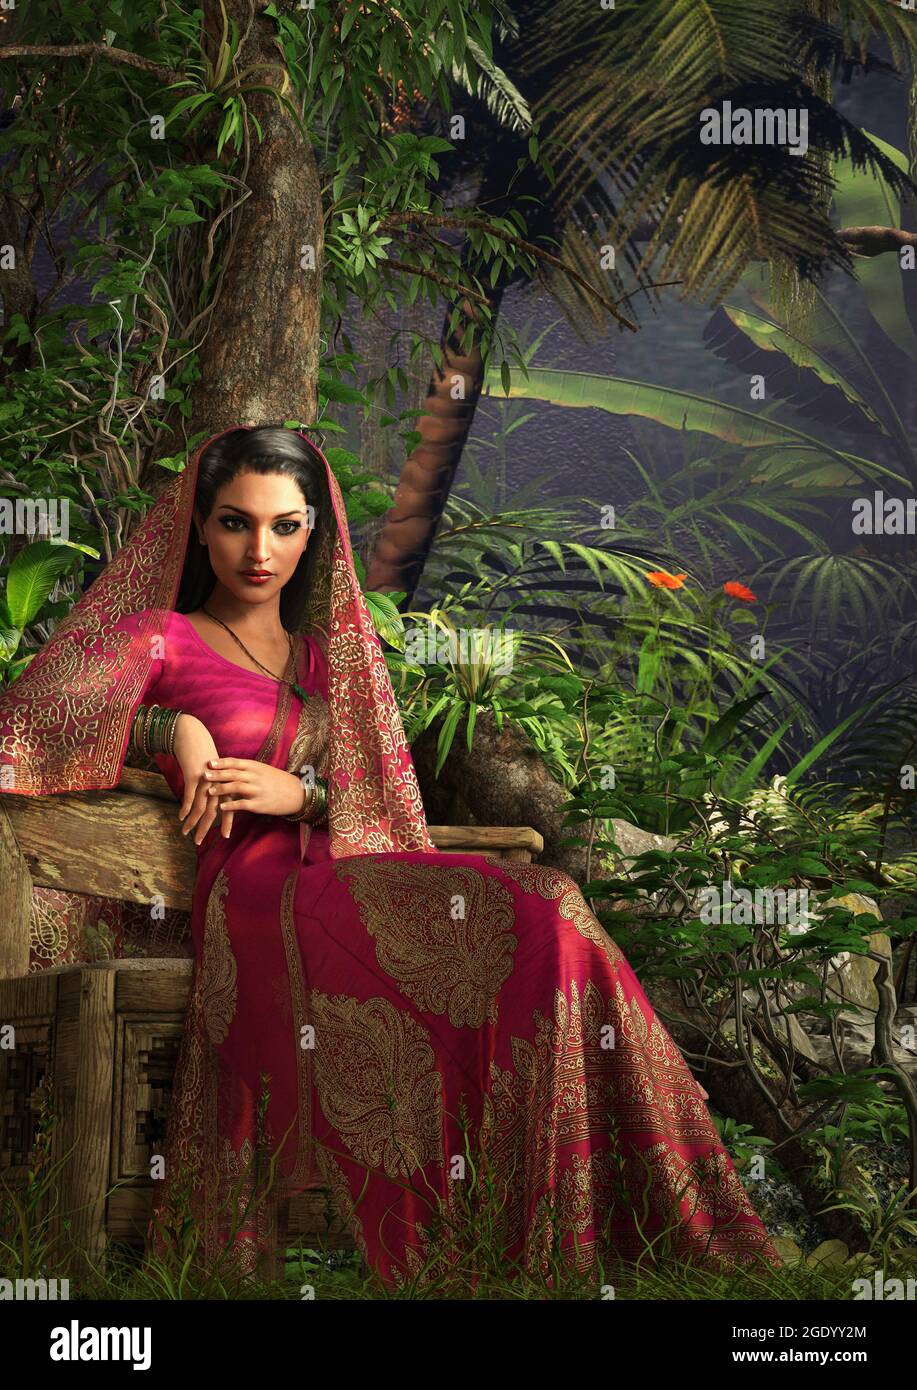 3d computer graphics of a woman with Indian dress and tropical environment Stock Photo